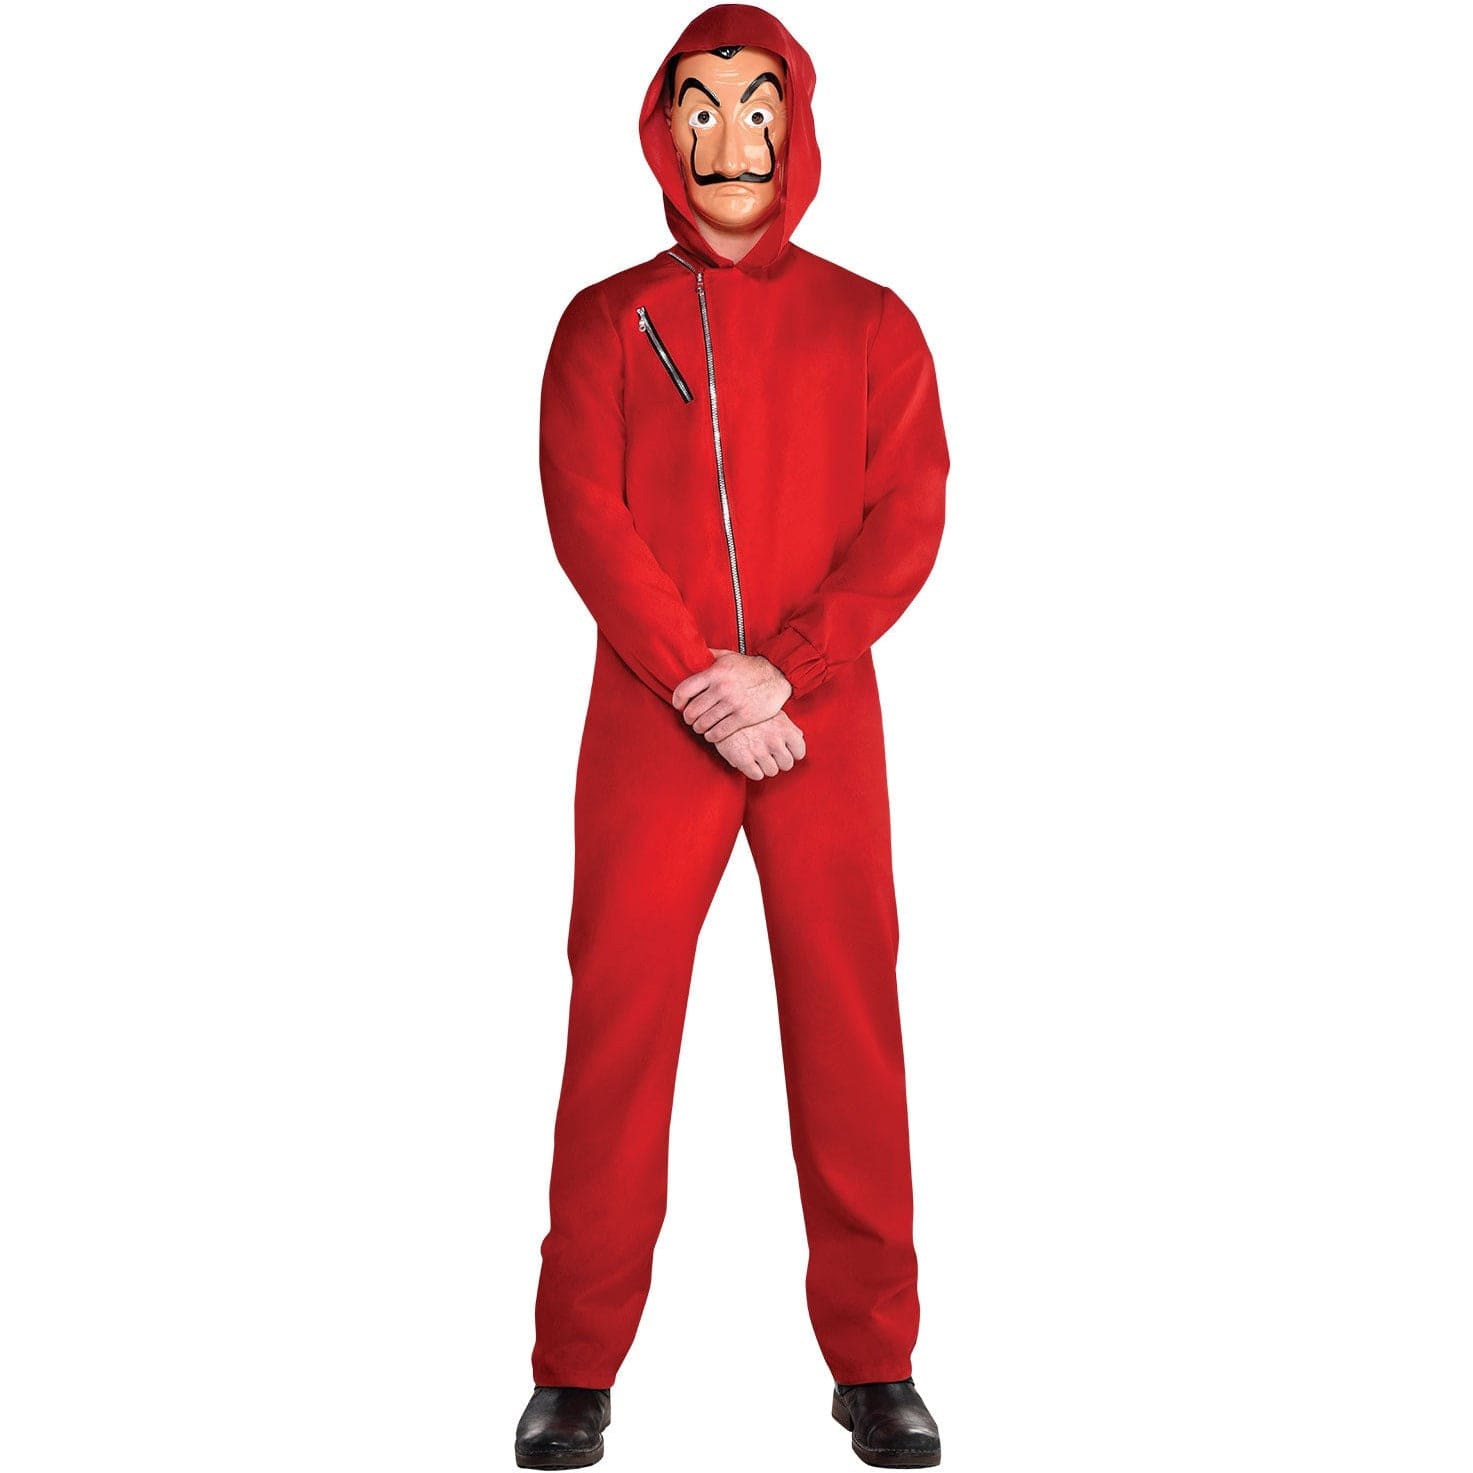 YaNuts Dali Costume for La Casa De Papel Dali Money Heist with Mask  (Small), Red | Cosplay costumes for men, Mens costumes, Hoodie jumpsuit